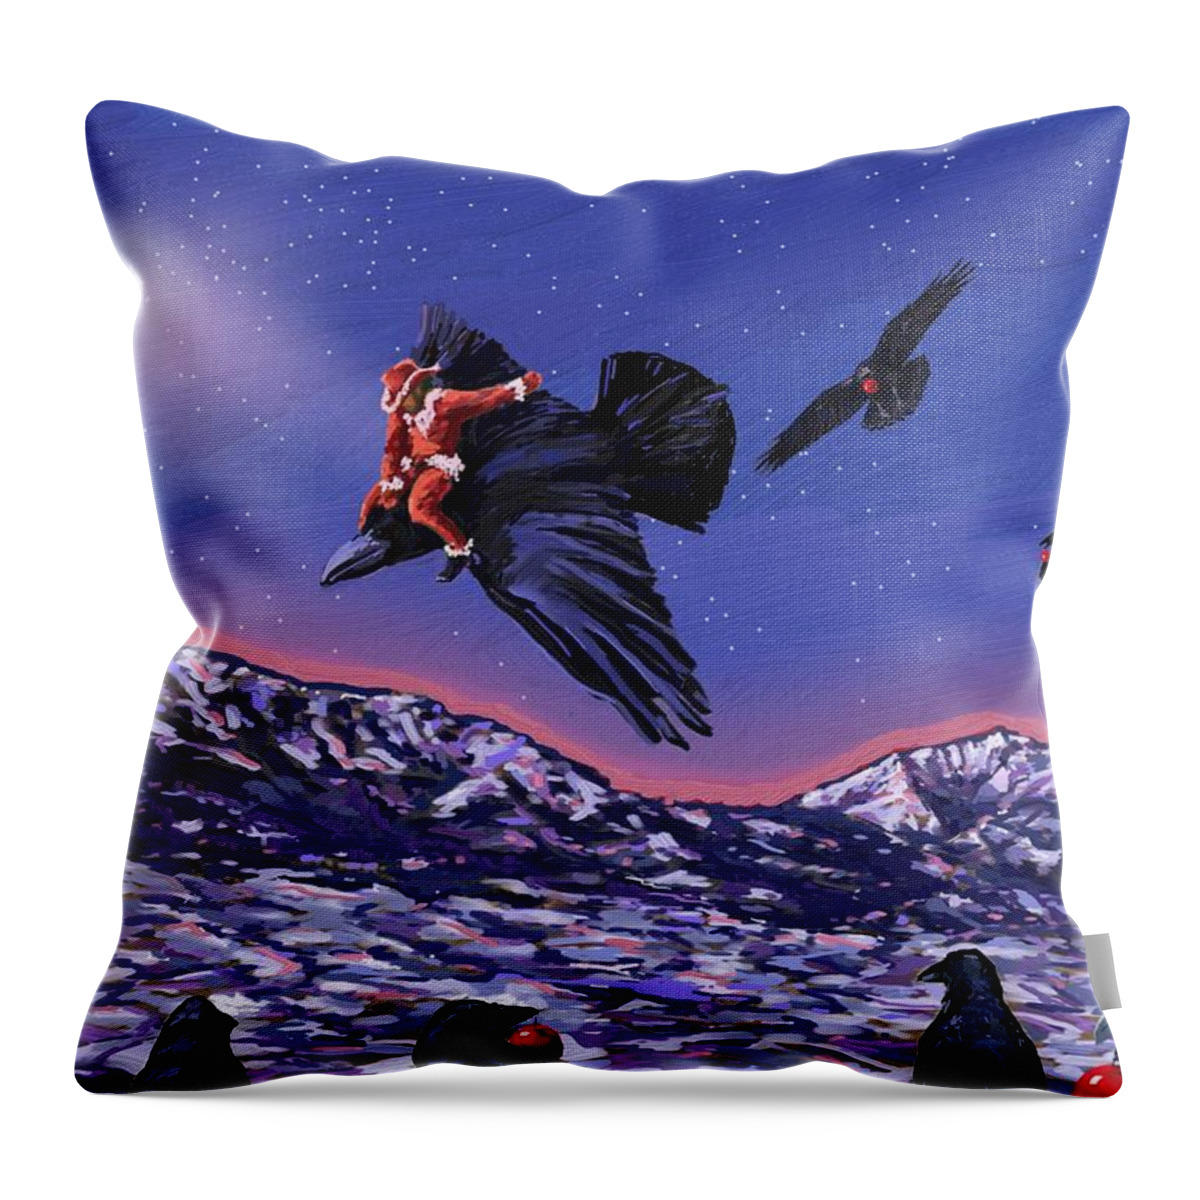 Xmas Throw Pillow featuring the digital art Santa's Scout by Les Herman